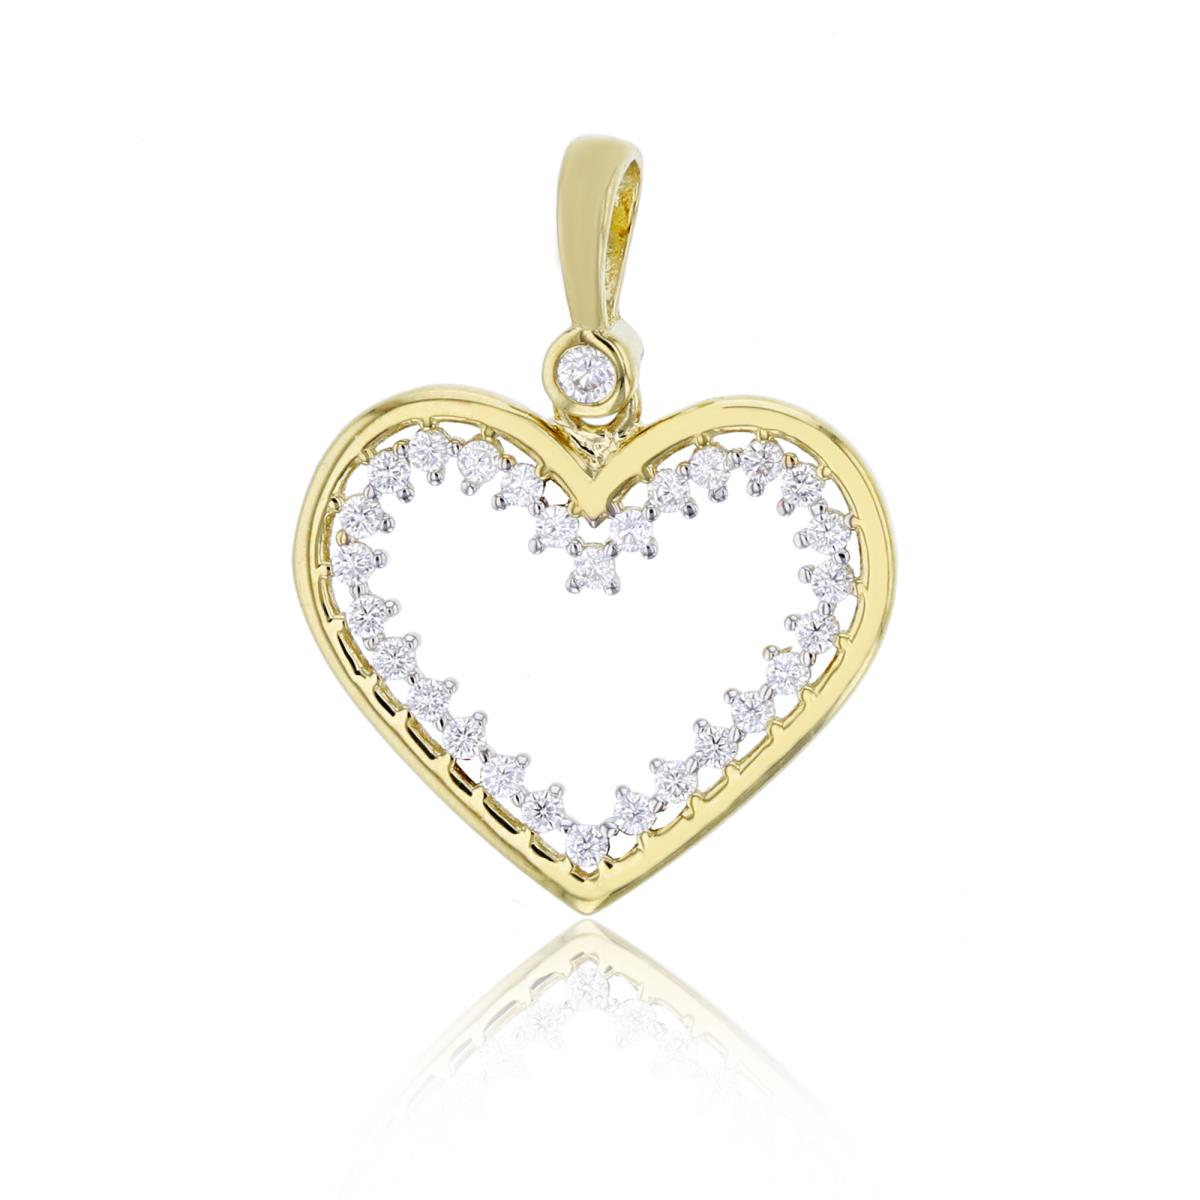 10K Yellow Gold 22x17mm Polished & Paved Open Heart Pendant